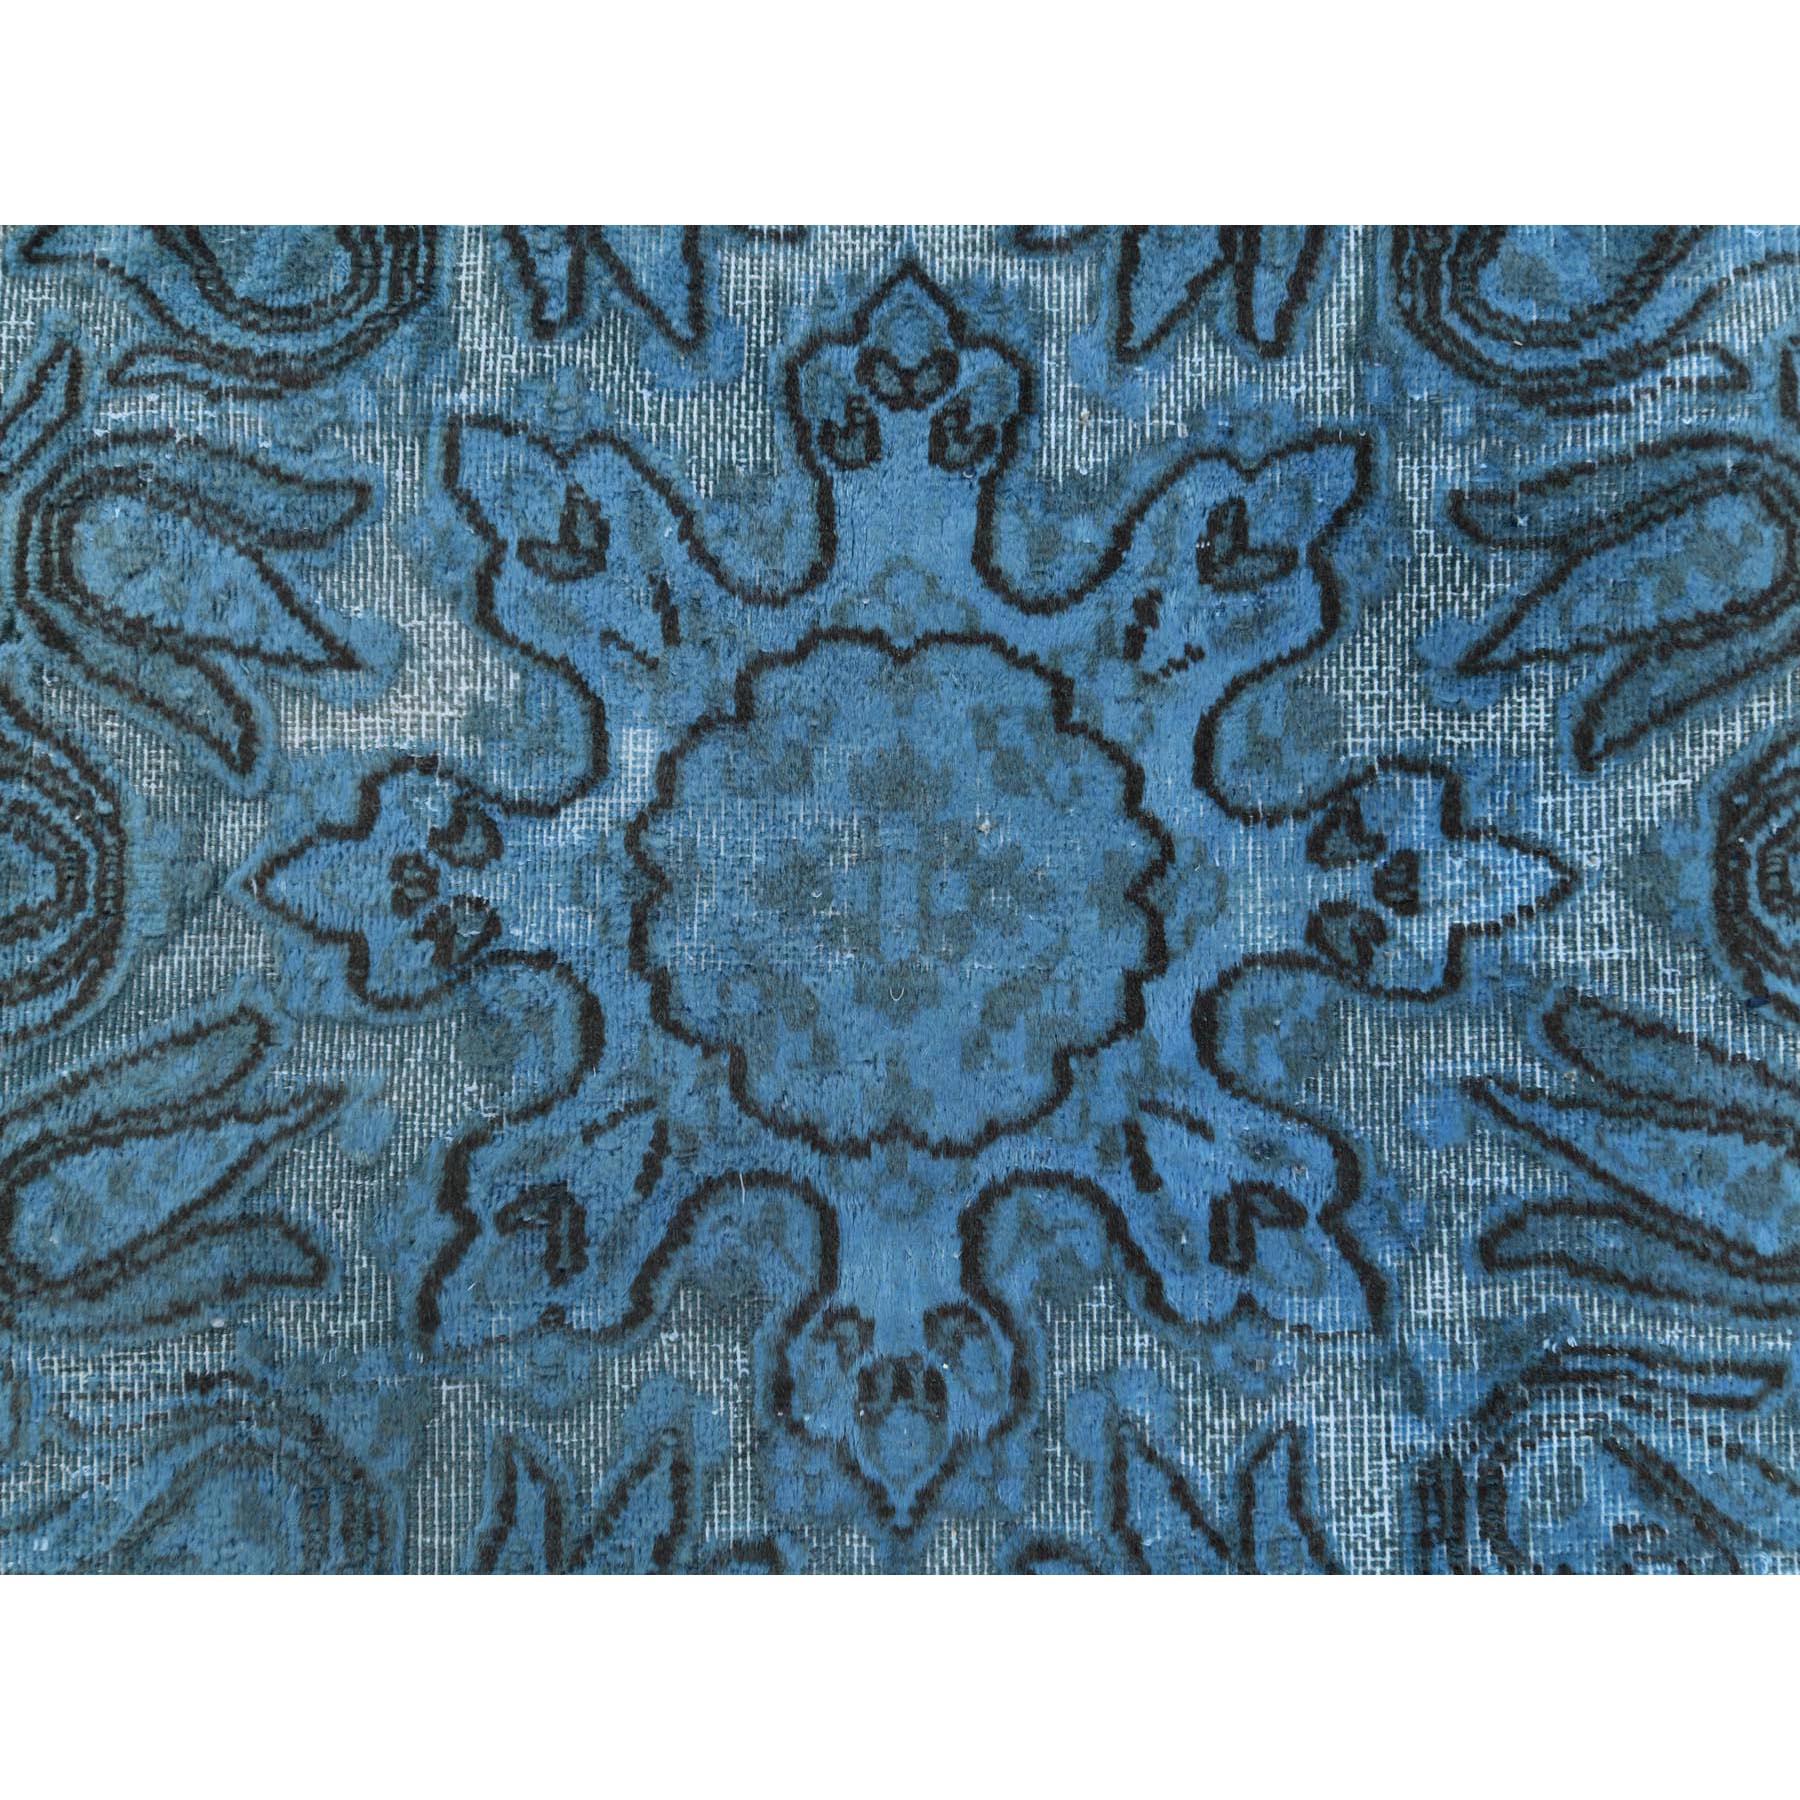 Wool Persian Kerman with Flower Medallion Worn Down Stone Wash Hand Knotted Rug 2